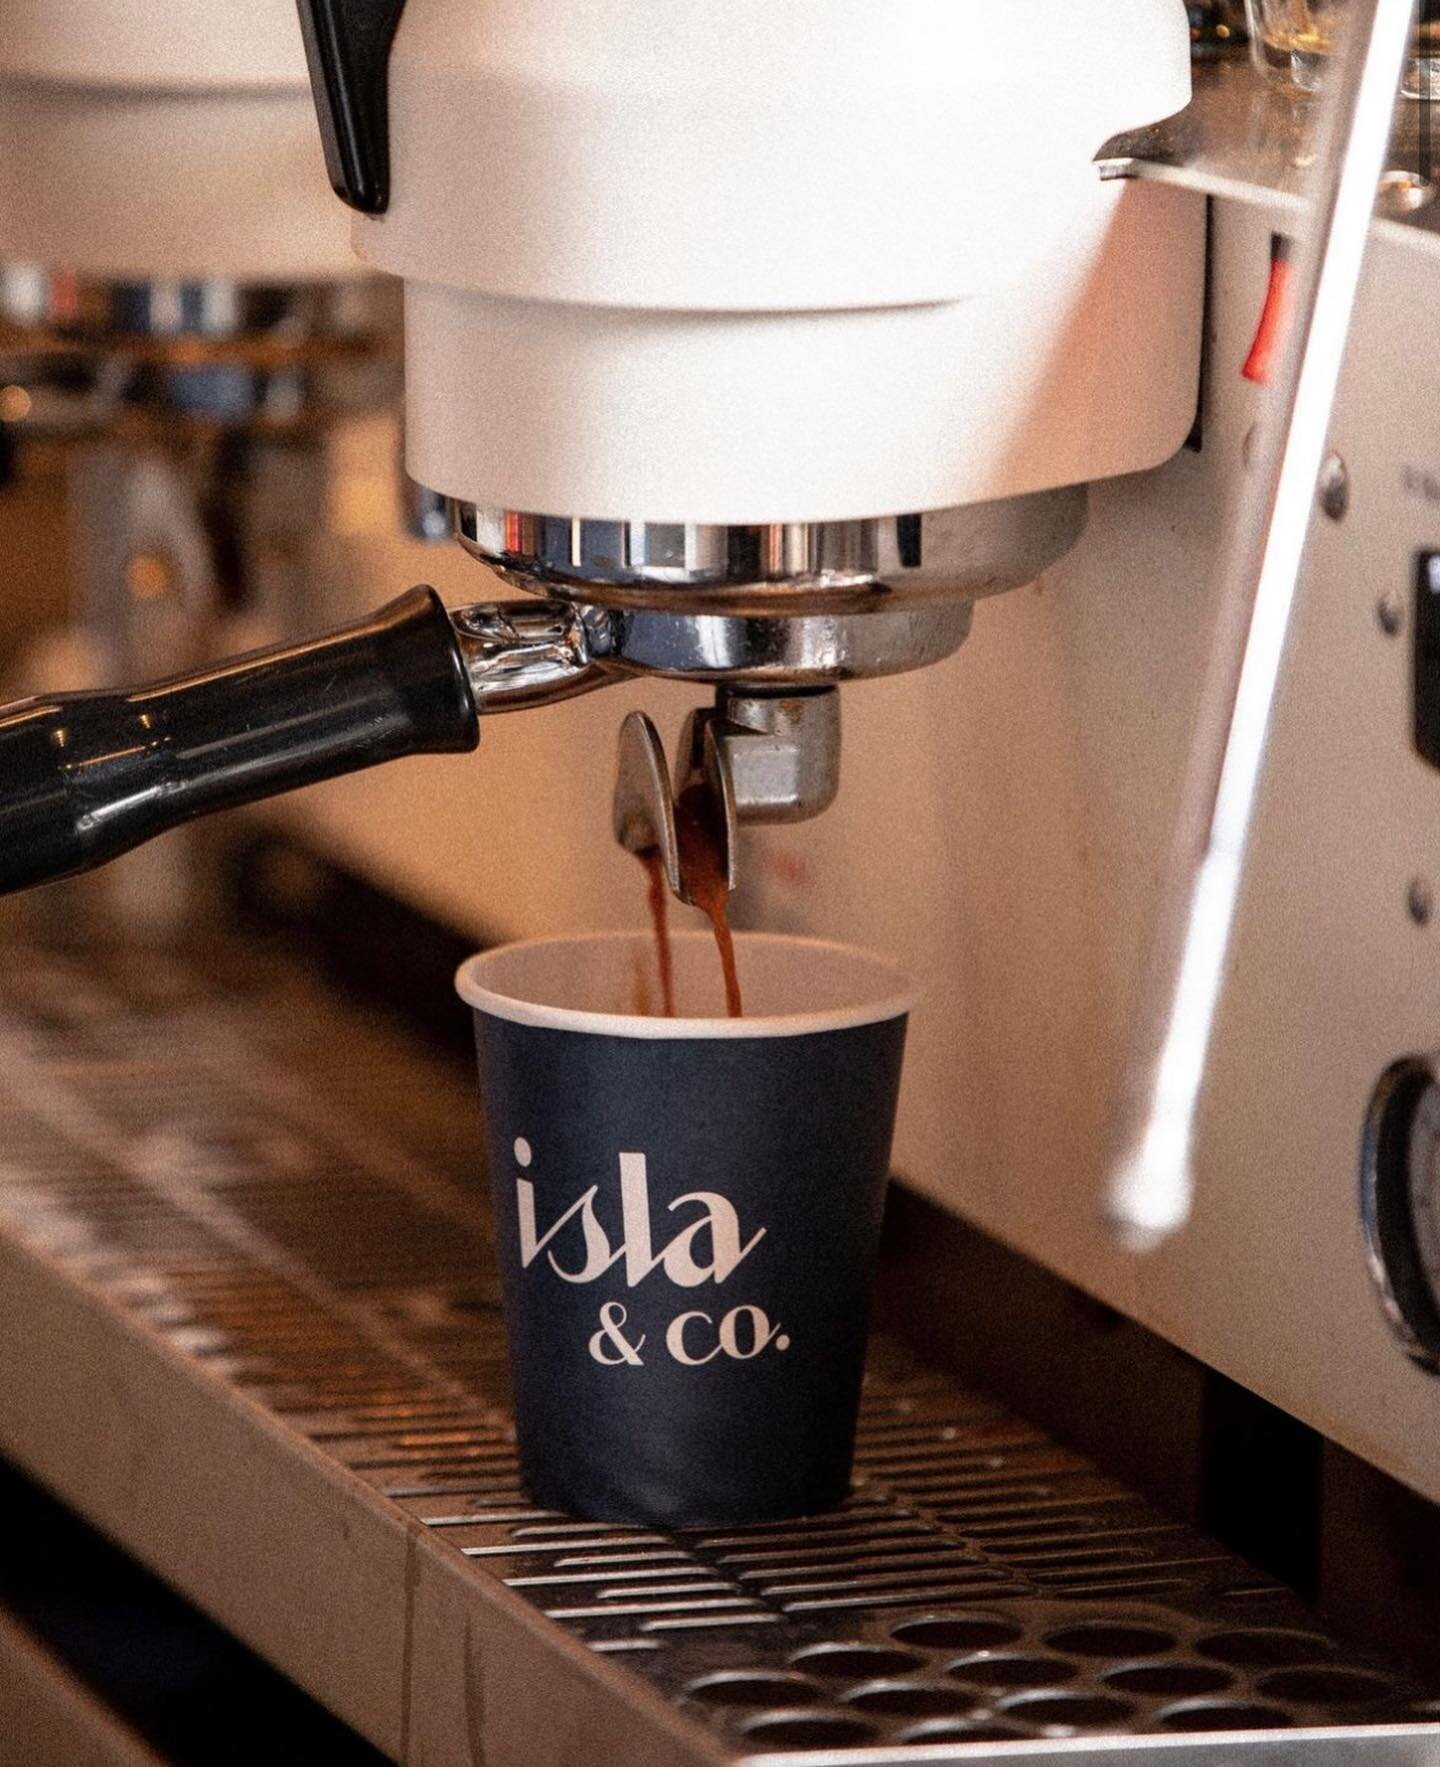 Start the day happy and caffeinated ☕️
Brunch starts at 10 AM! 

📍@islaandco 
#coffee #wpb #brunchallday